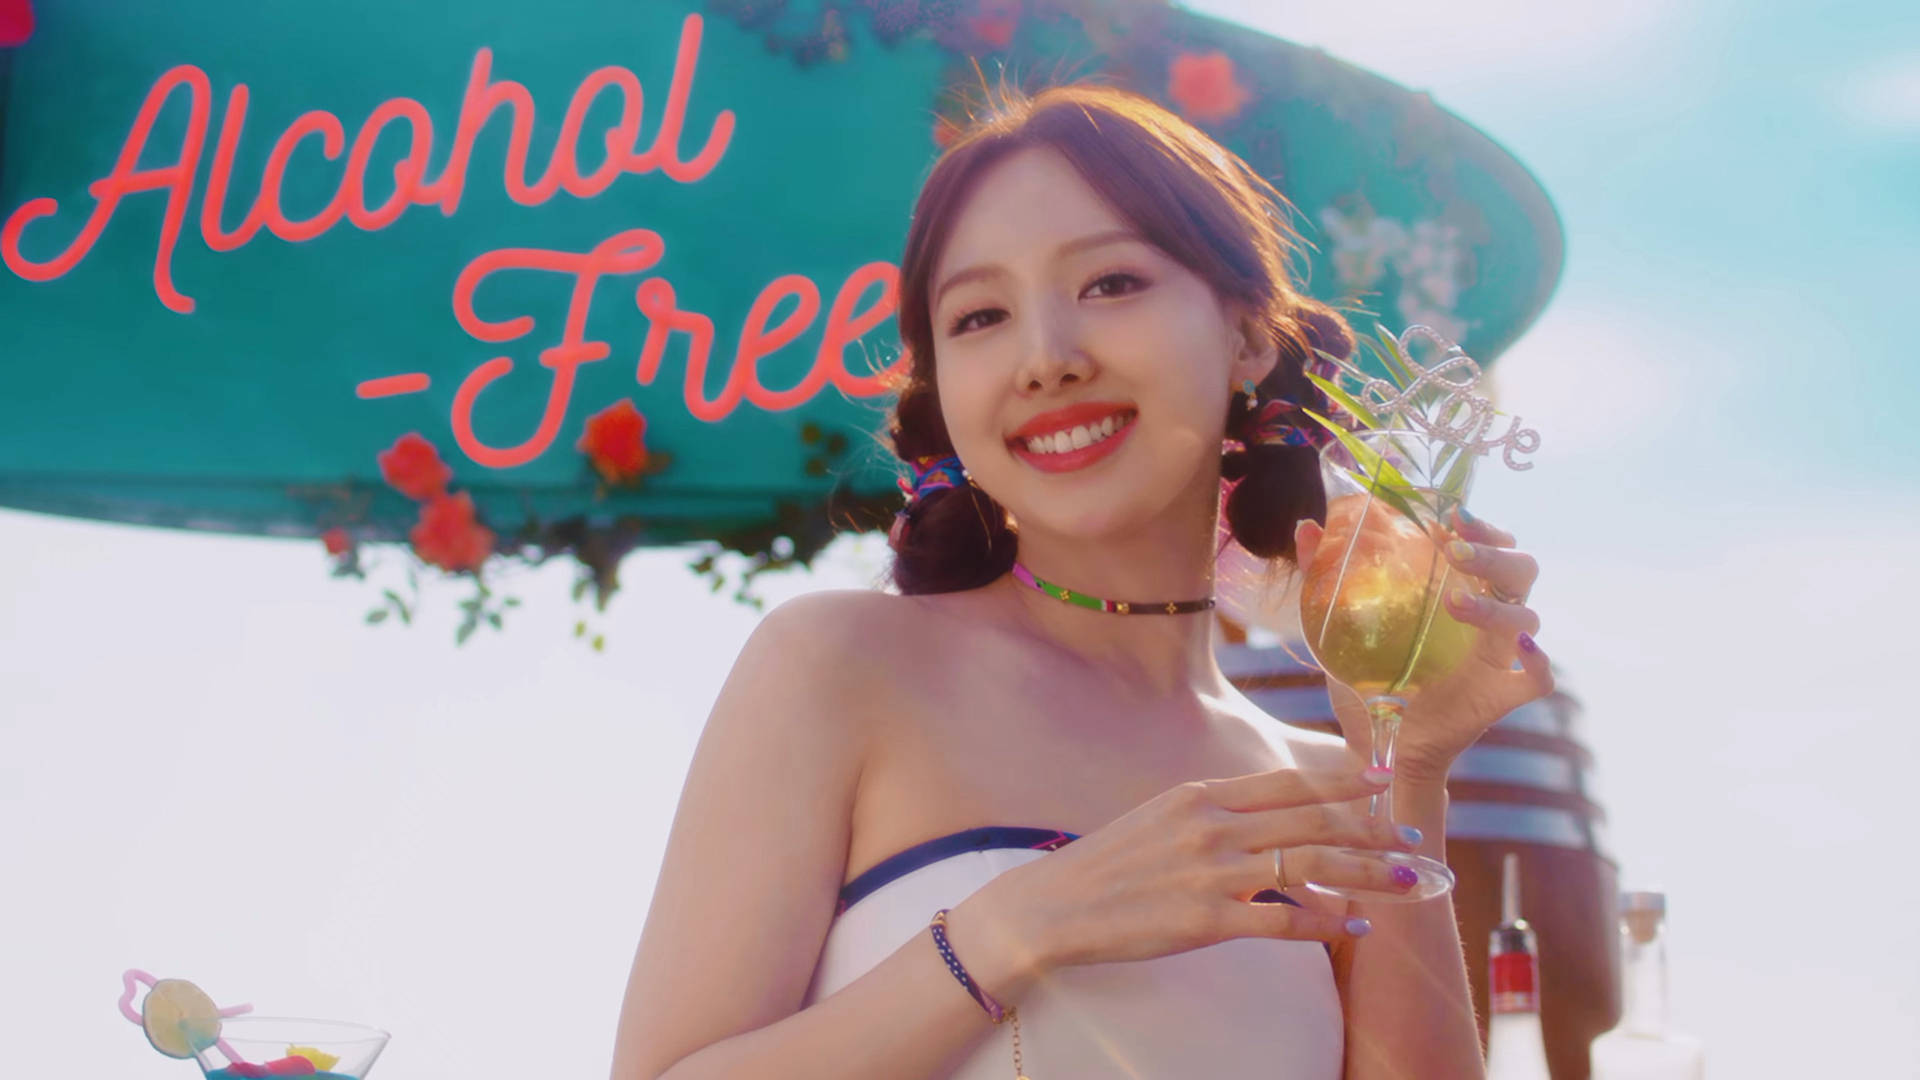 Twice Nayeon Holding A Drink Wallpaper